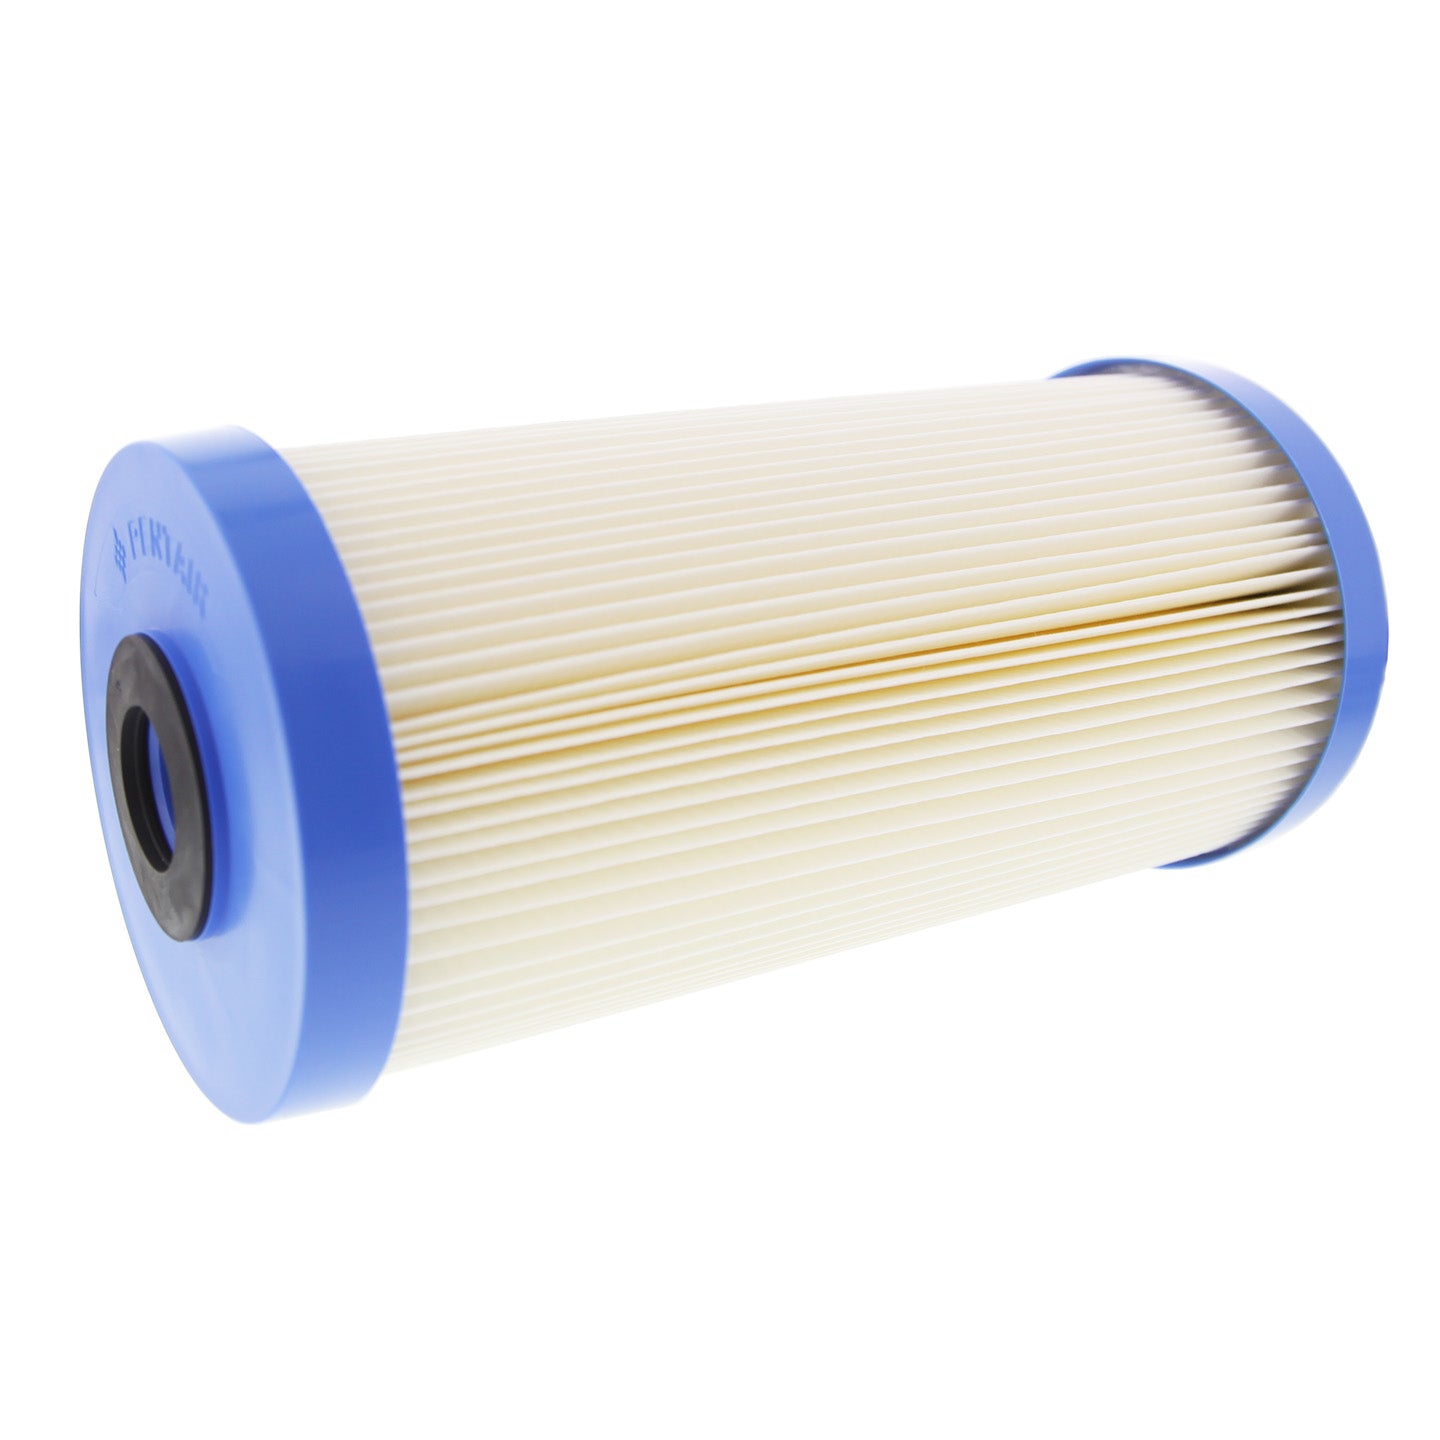 Pentek ECP20-BB Pleated Sediment Water Filter (9-3/4-inch x 4-1/2-inch) (Side Two View)